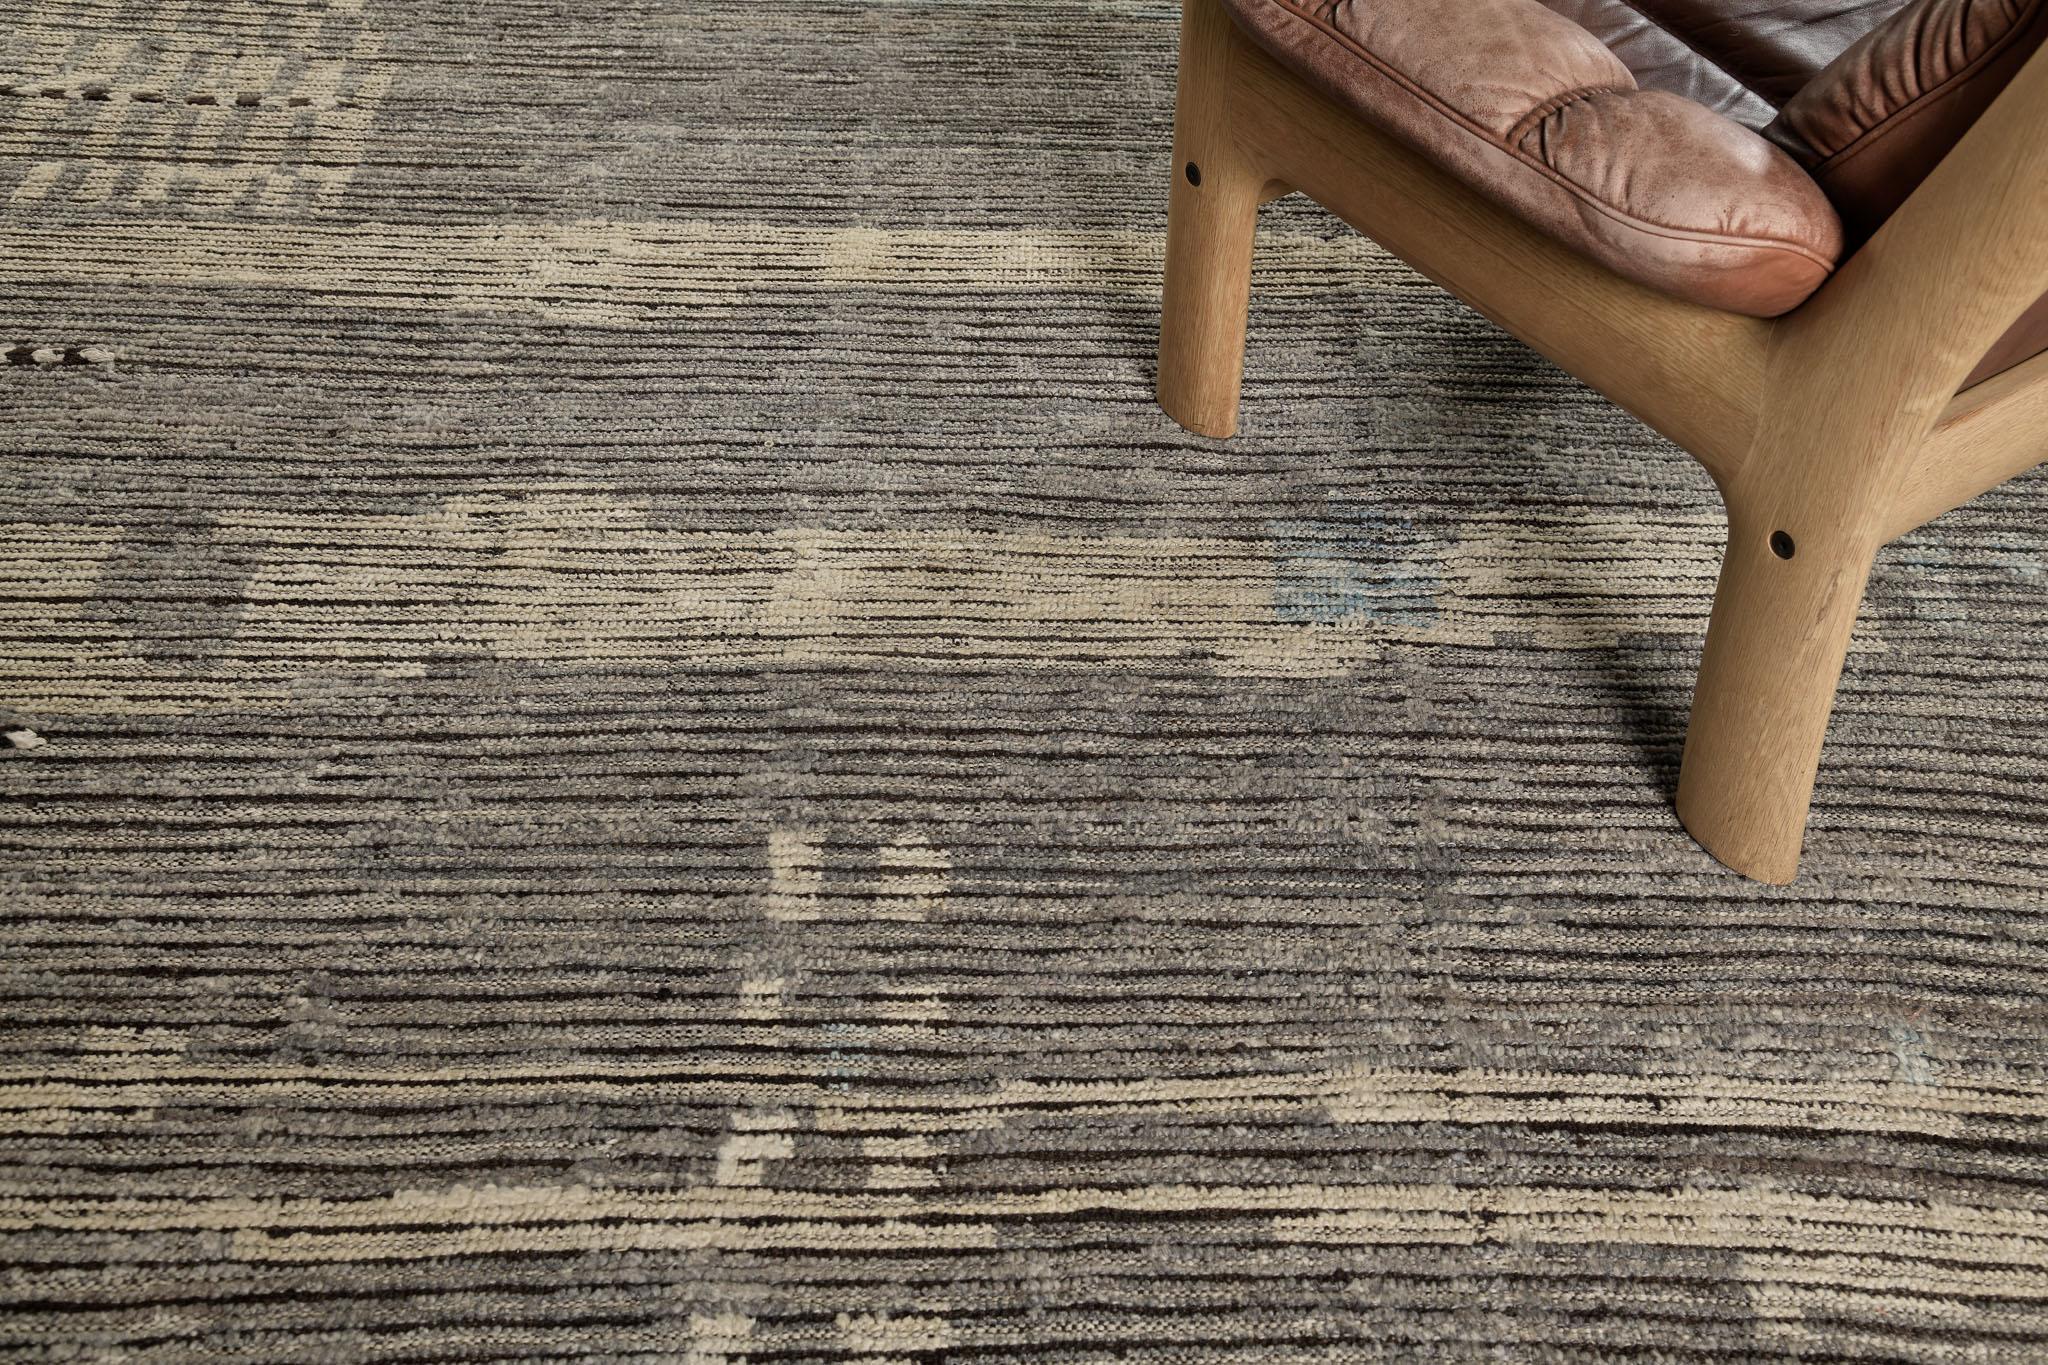 Nakhla is a natural earth-toned rug and a modern interpretation of the Moroccan world. These rugs' irregular patches and linear strokes of cream, blue, and gray resemble the fibers of nature and their ability to be used for crafts such as cords and